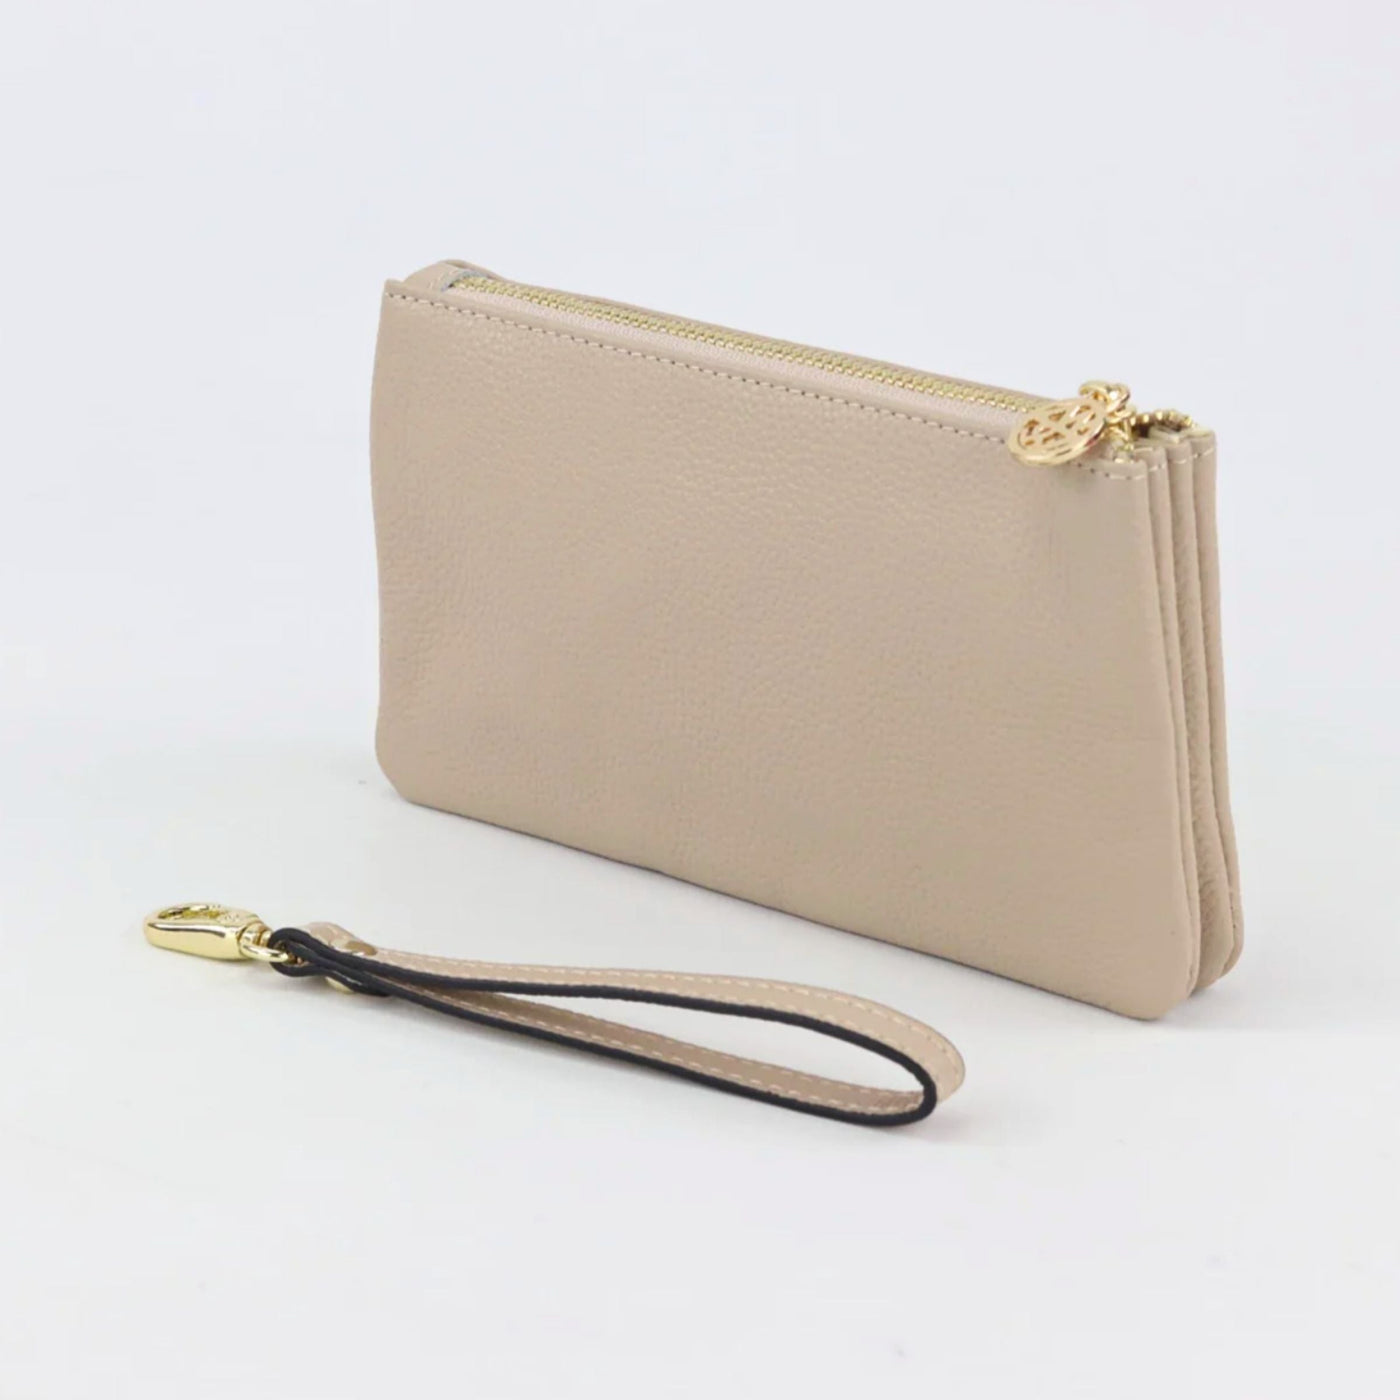 Polly Nude Clutch